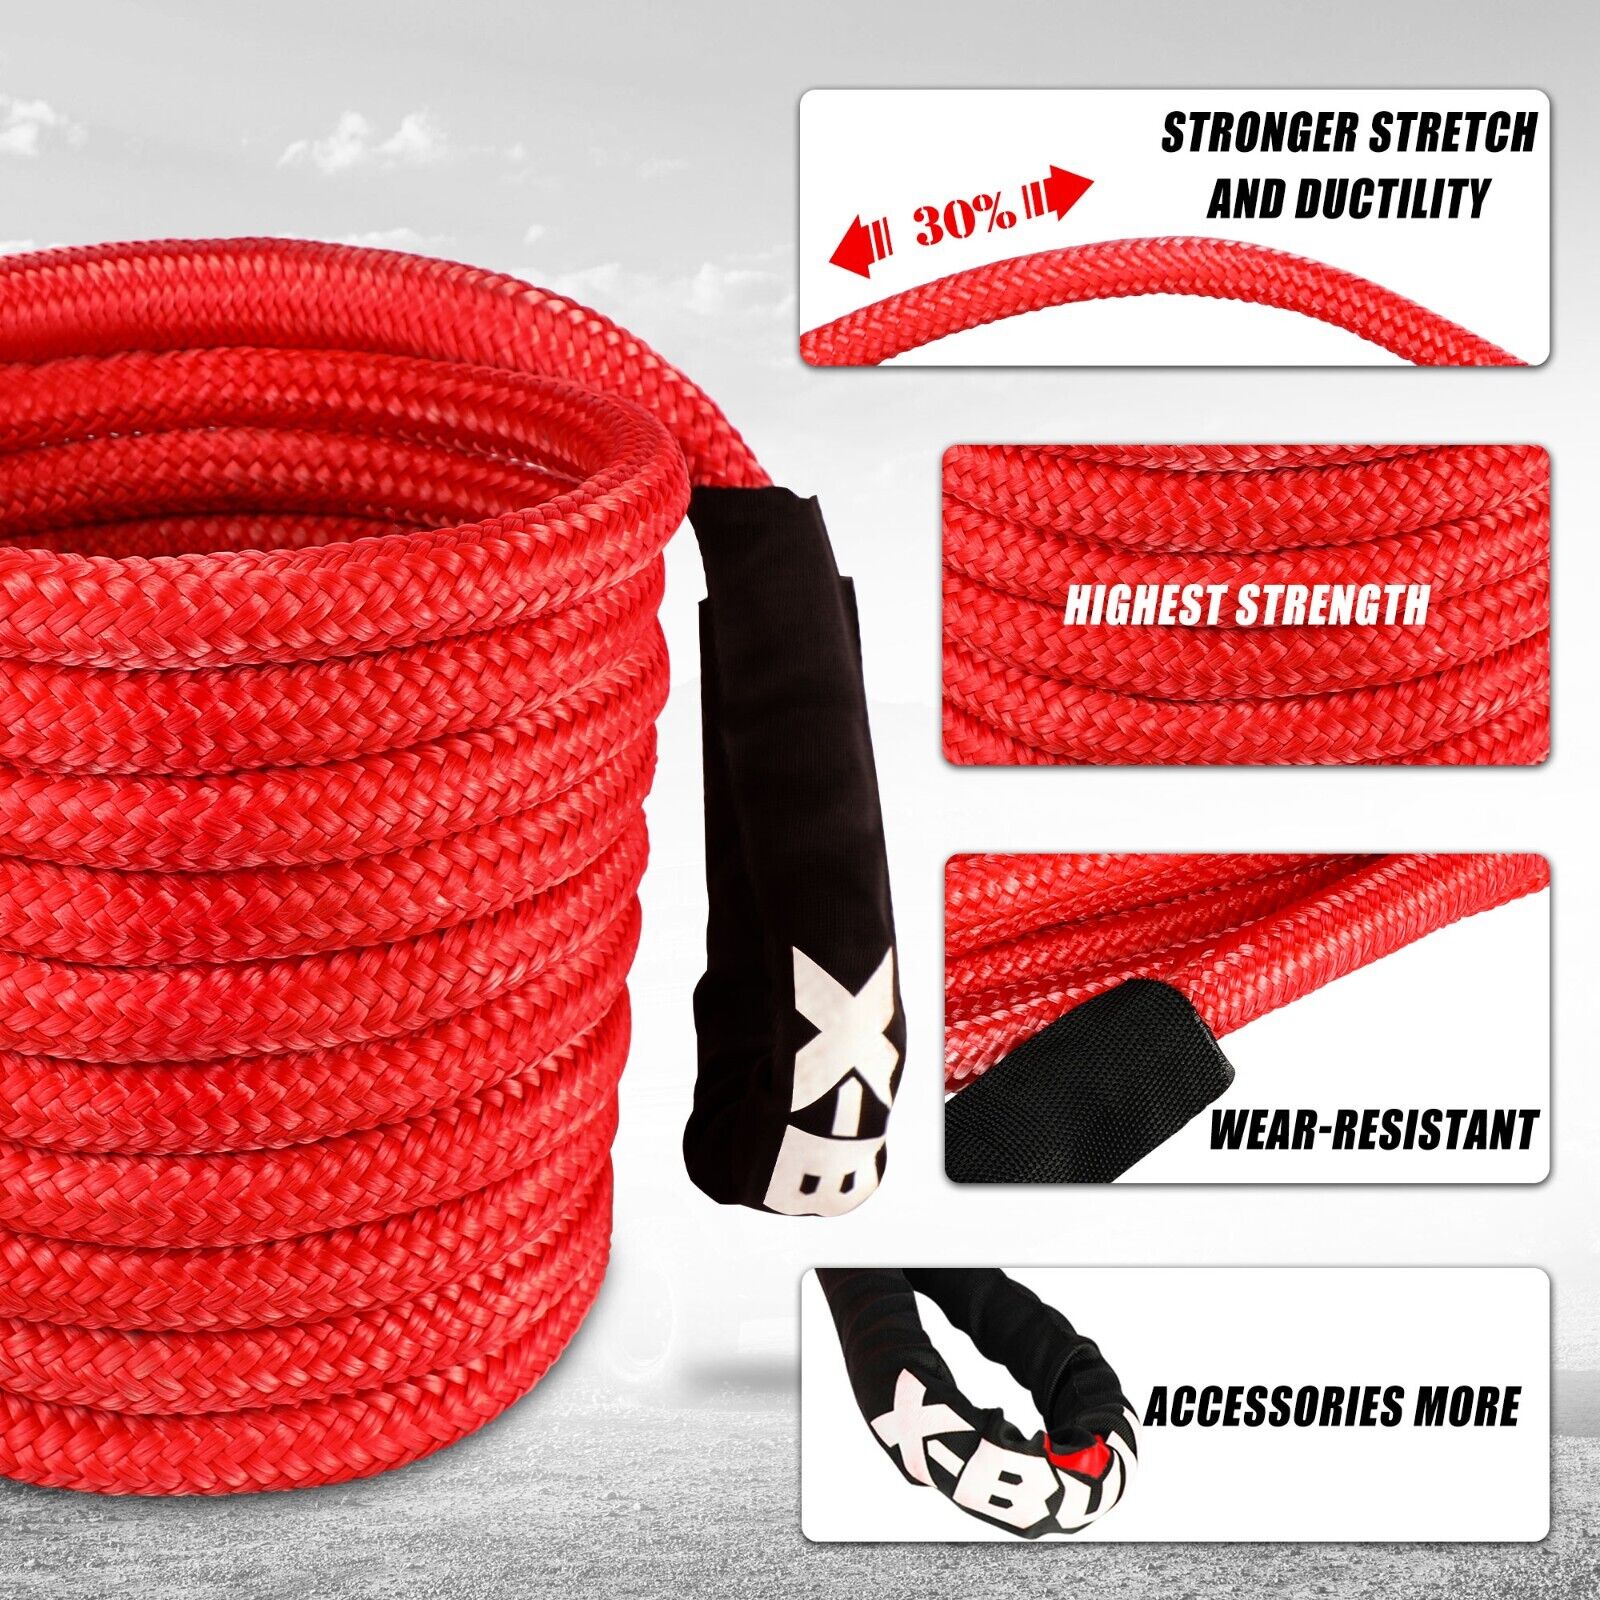 X-BULL Kinetic Rope 25mm x 9m Snatch Strap Recovery Kit Dyneema Tow Winch | Auzzi Store